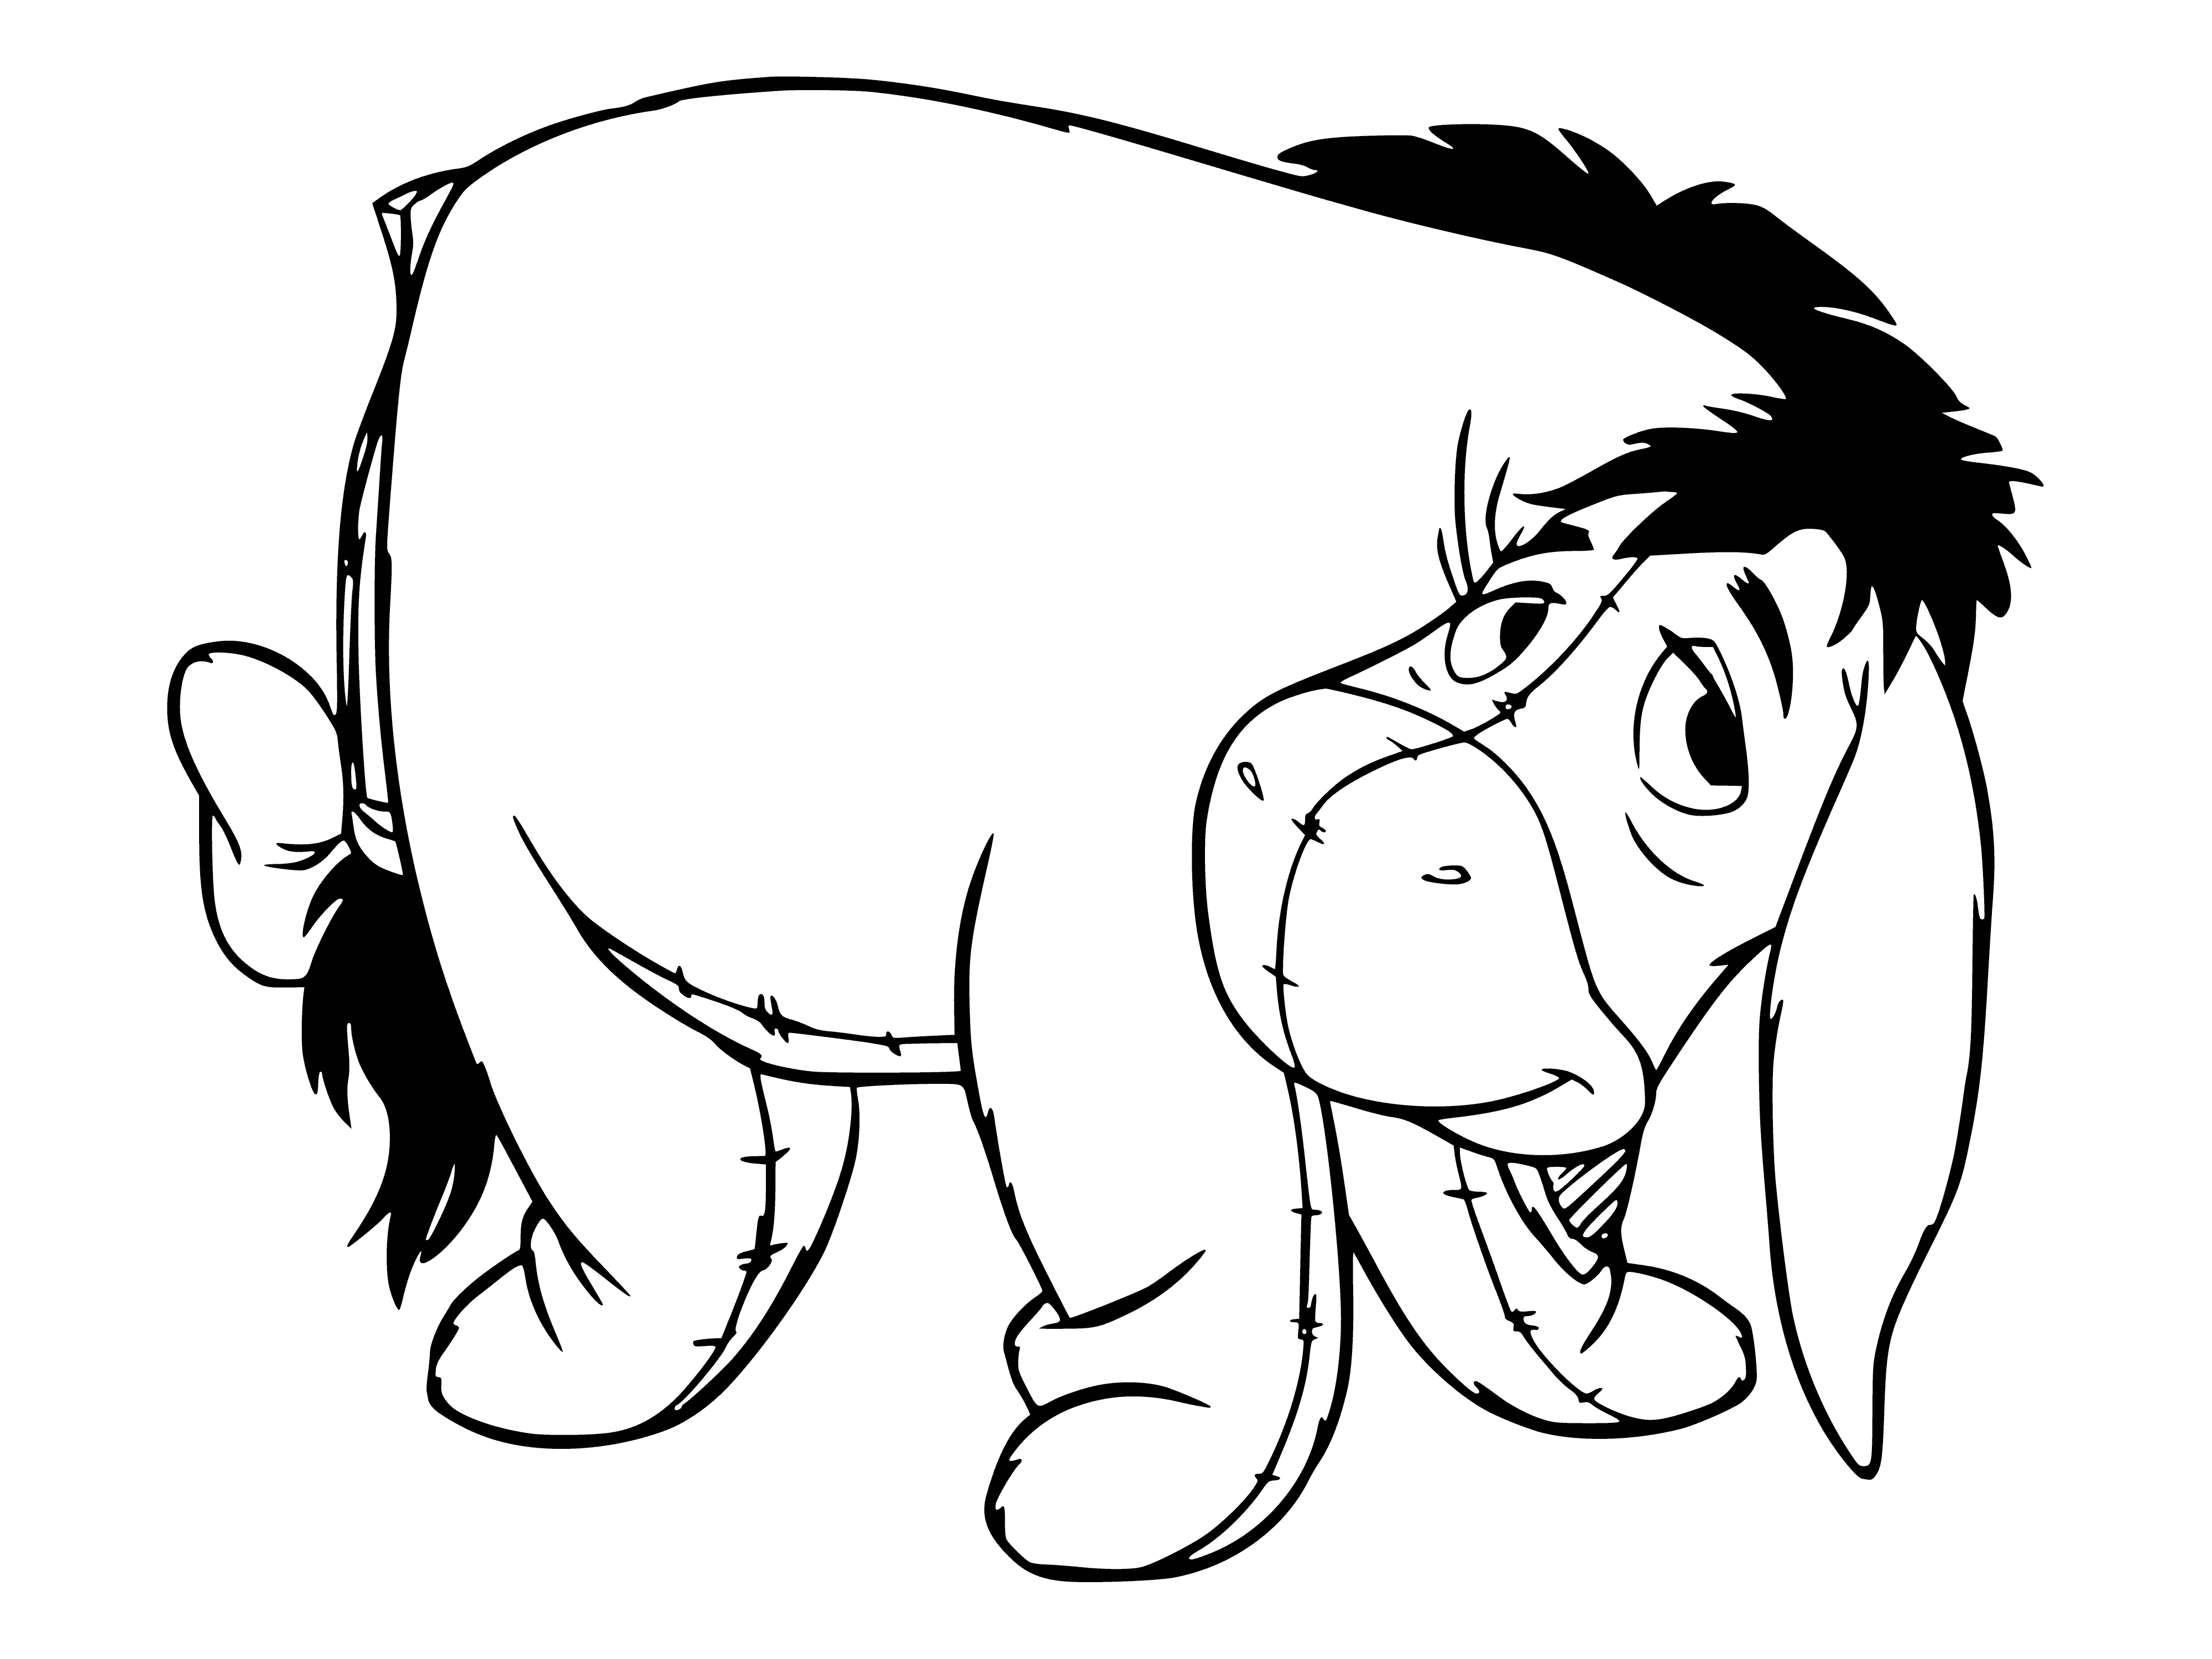 coloring page: Pooh comforts a sad donkey by putting his arm around it.